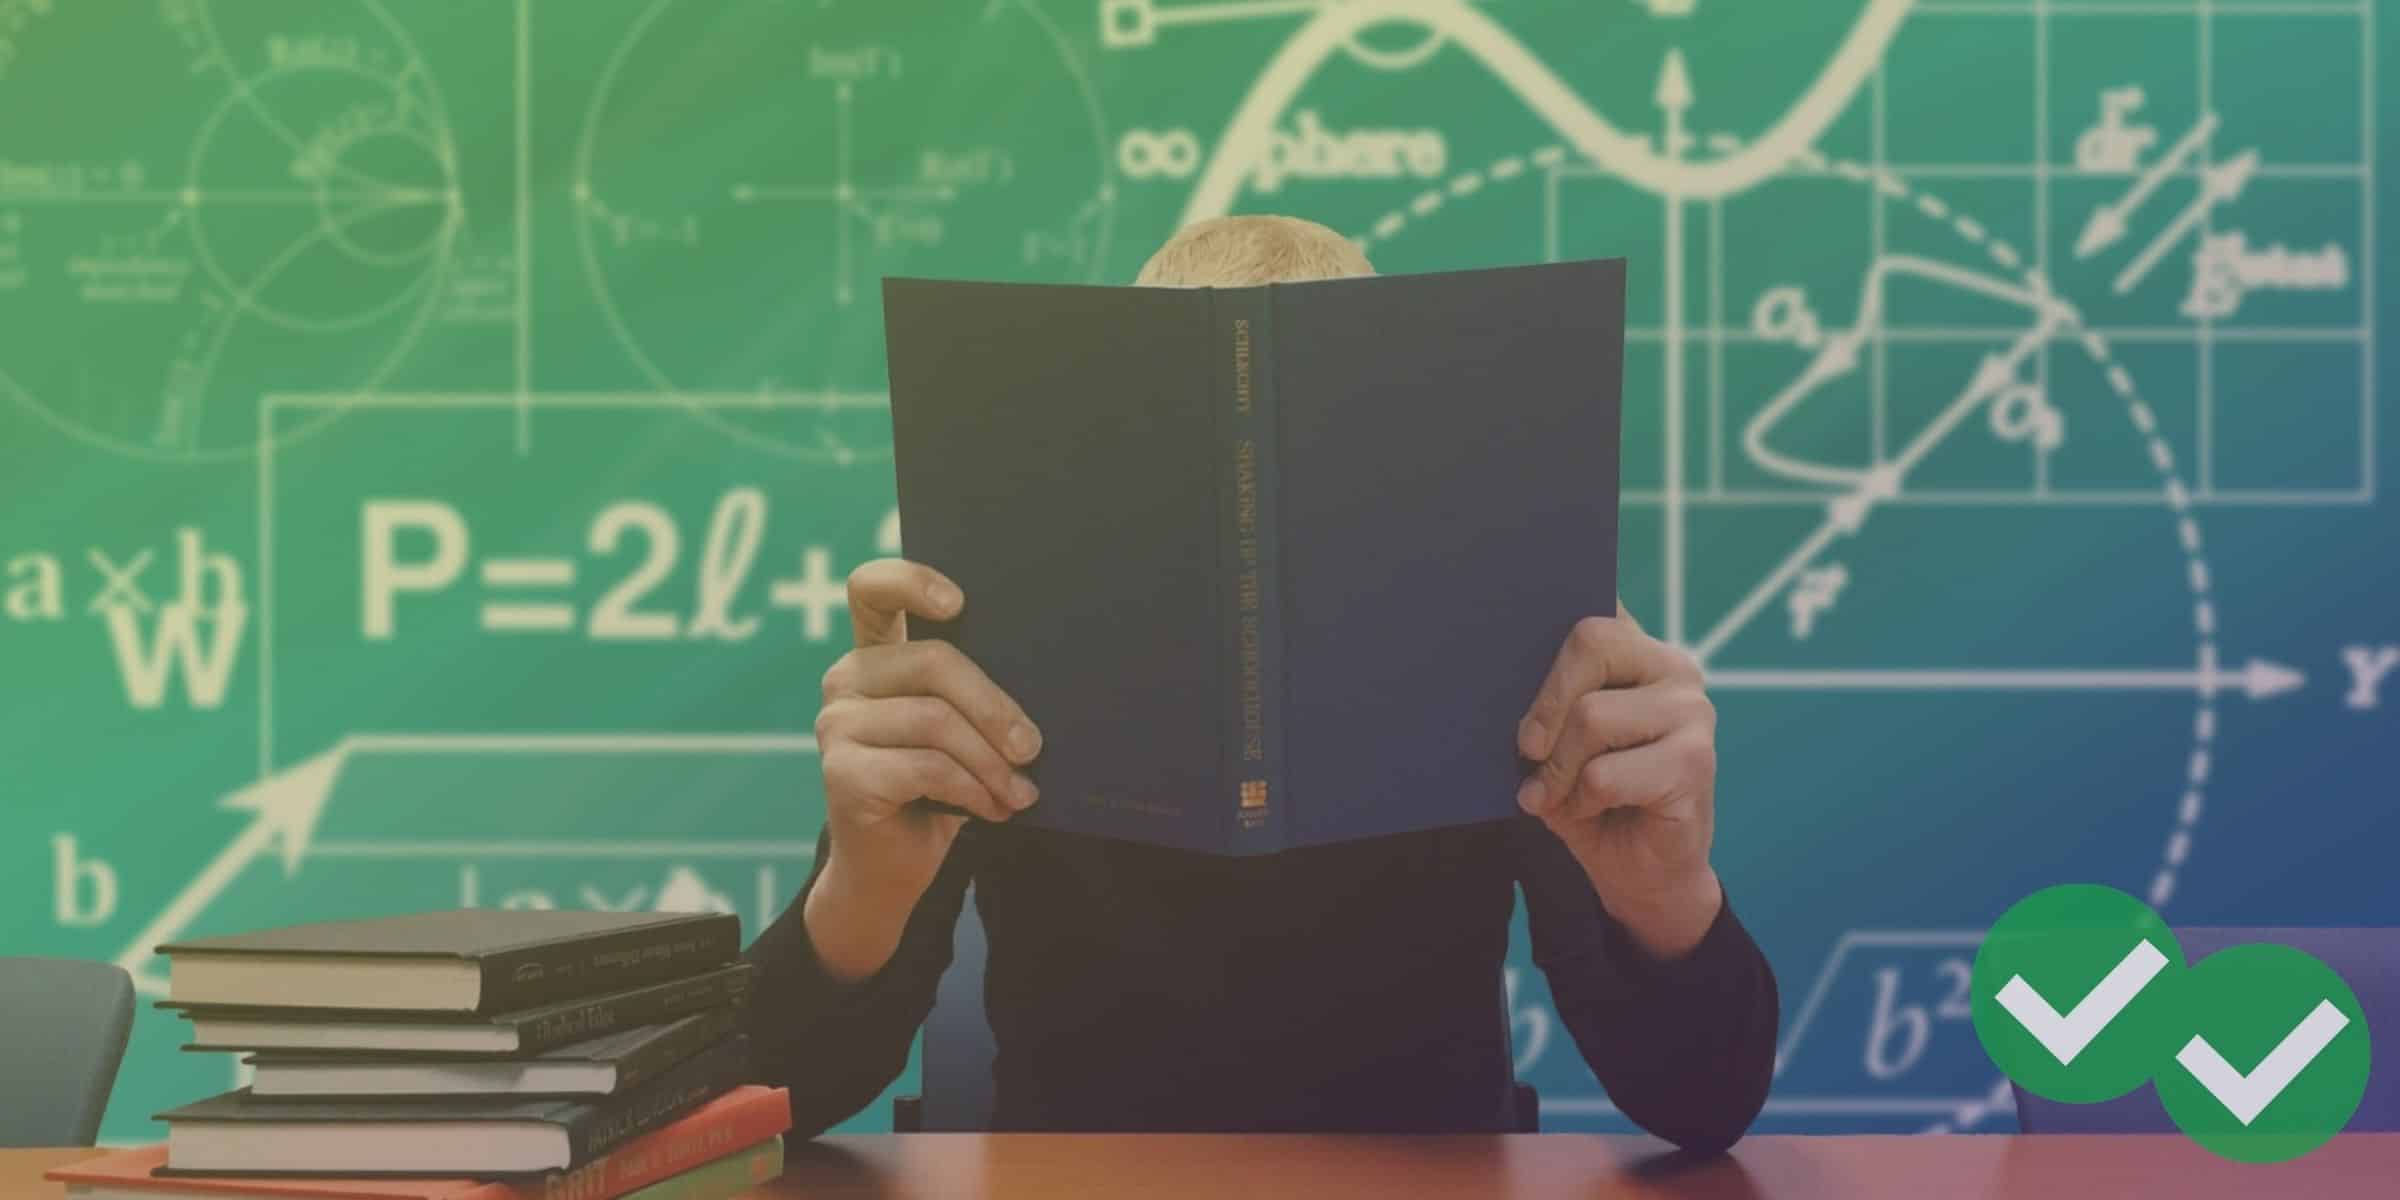 Person holding book that covers their face while sitting in front of blackboard full of math problems, representing SAT math problem solving and data analysis - image by Magoosh